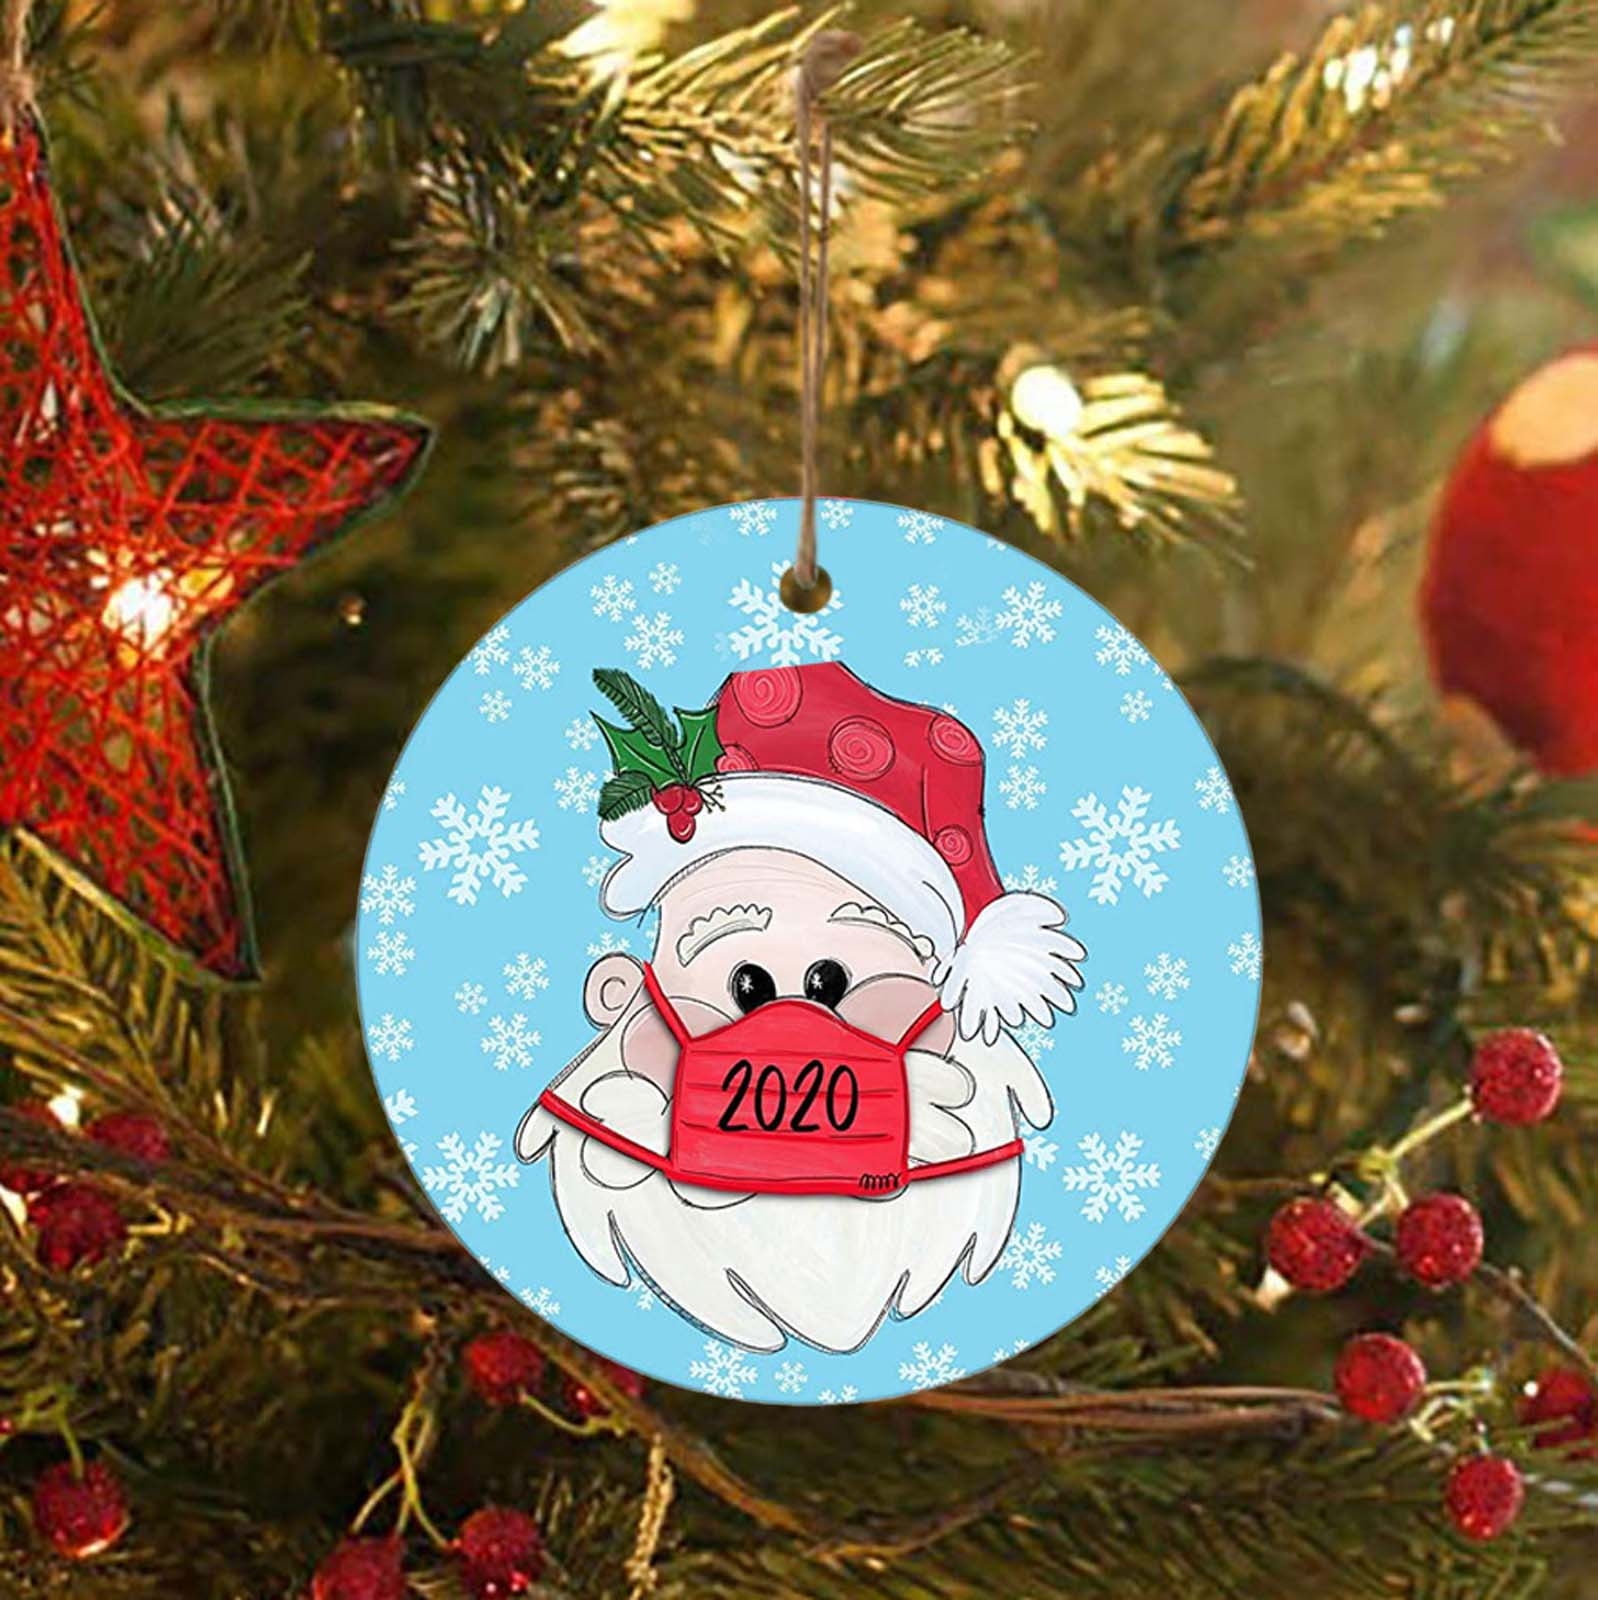 Details about   2020 Christmas Ornament Santa Wearing A Face Mask Christmas Tree Hangings Decor 